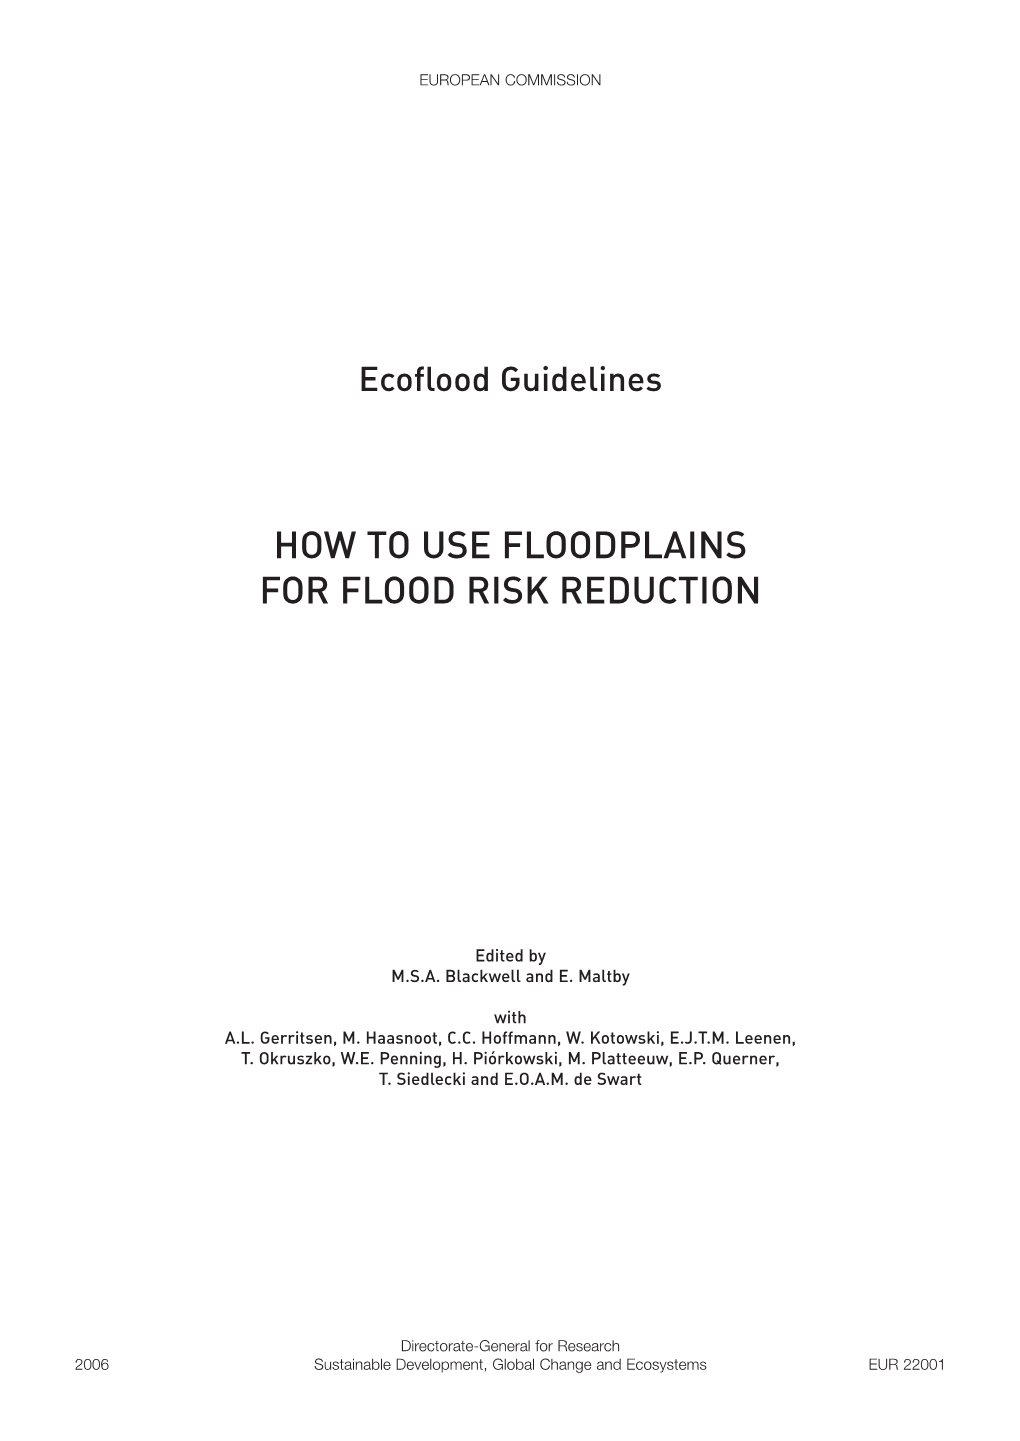 How to Use Floodplains for Flood Risk Reduction